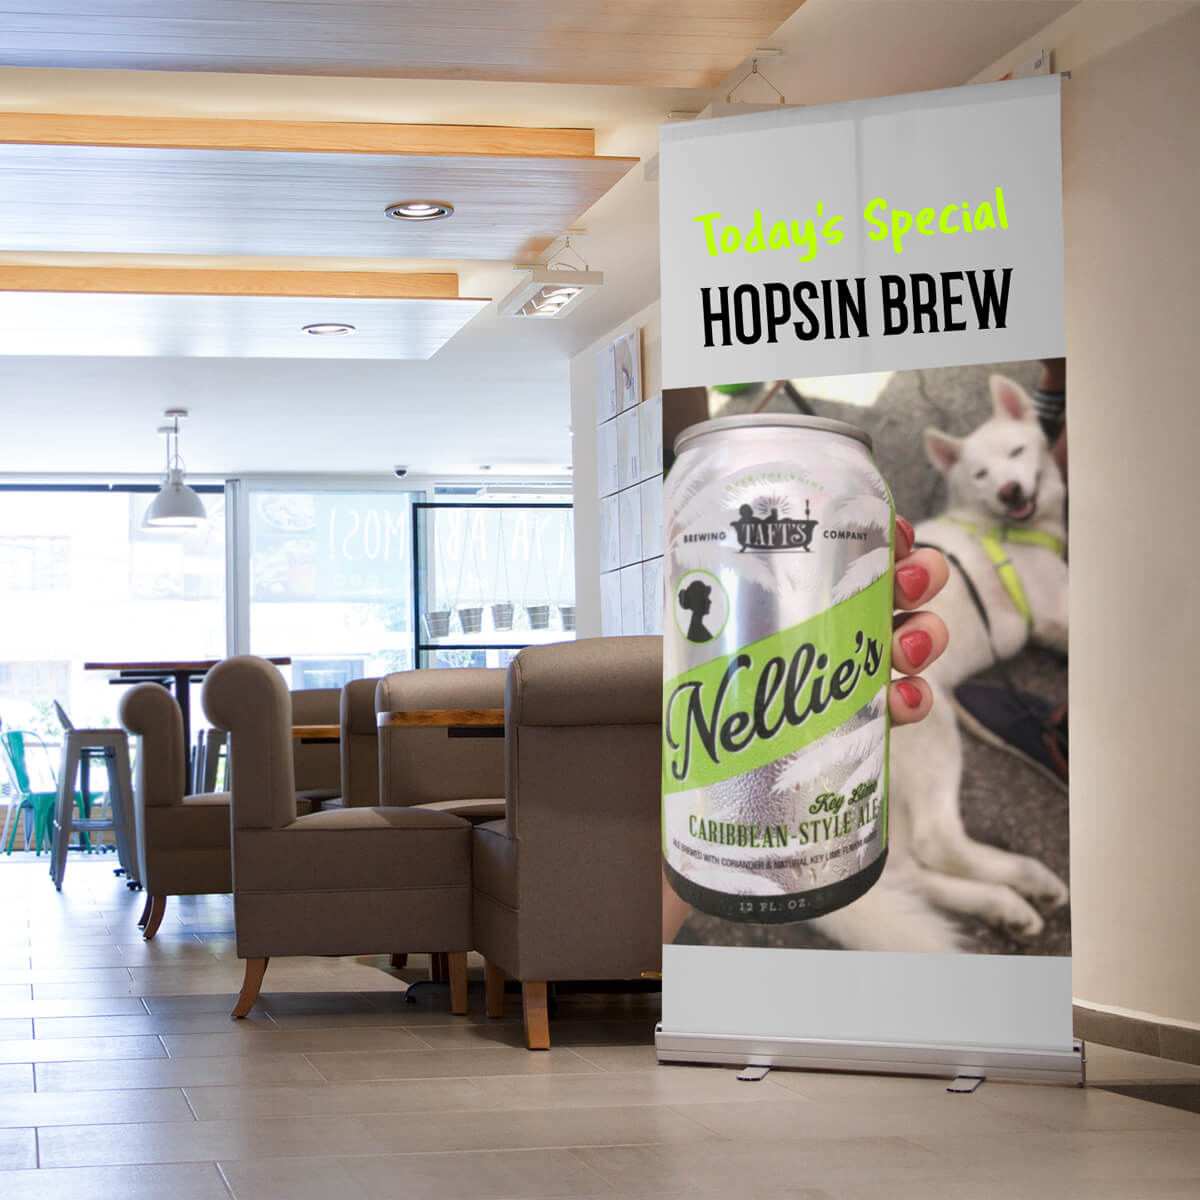 Hopsin brew pull up banner stand signs and banners Curative Printing